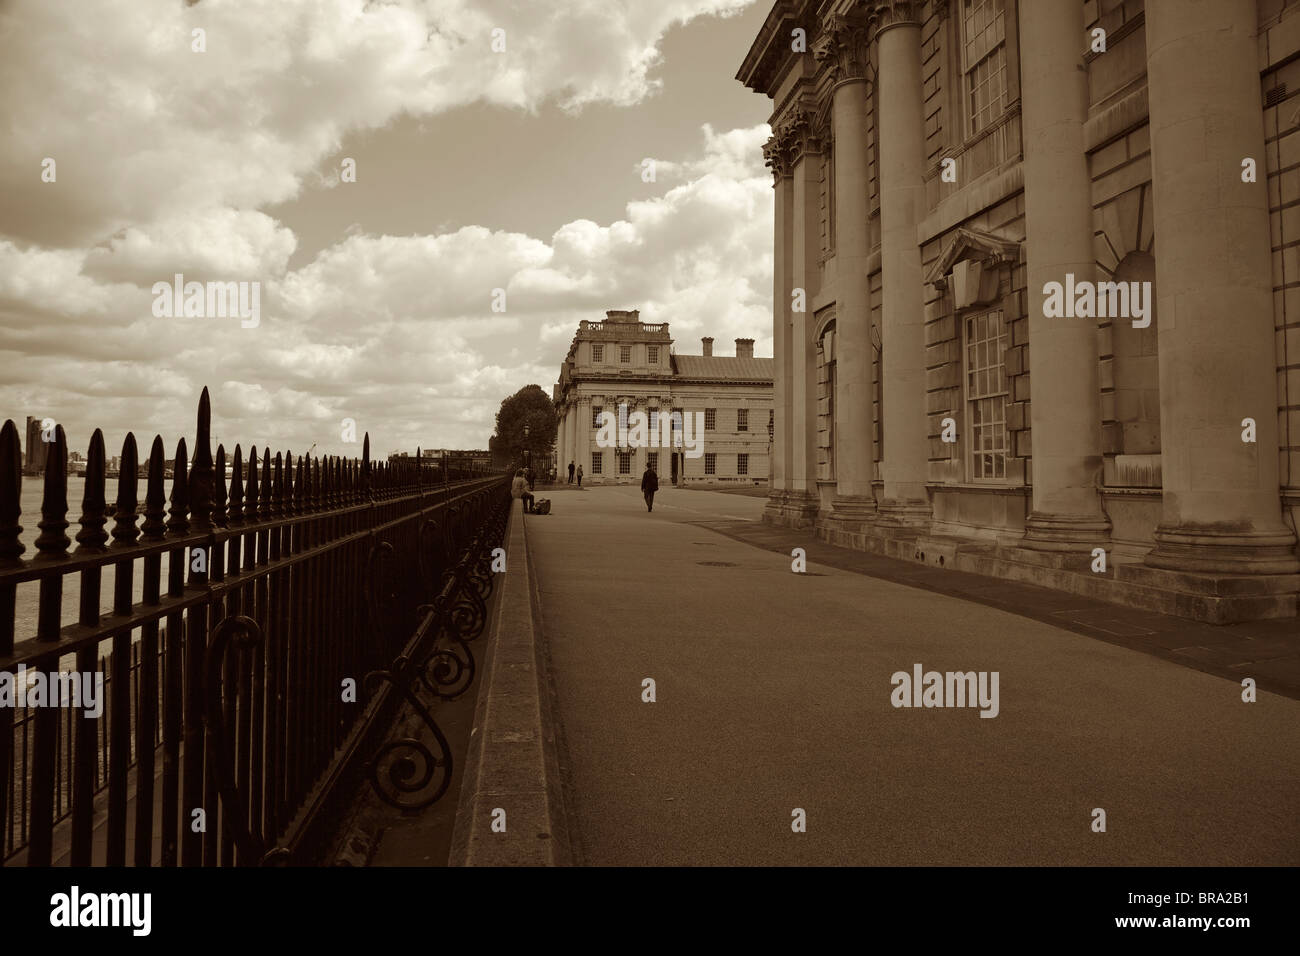 The Old Royal Naval College, Greenwich, London. Stock Photo